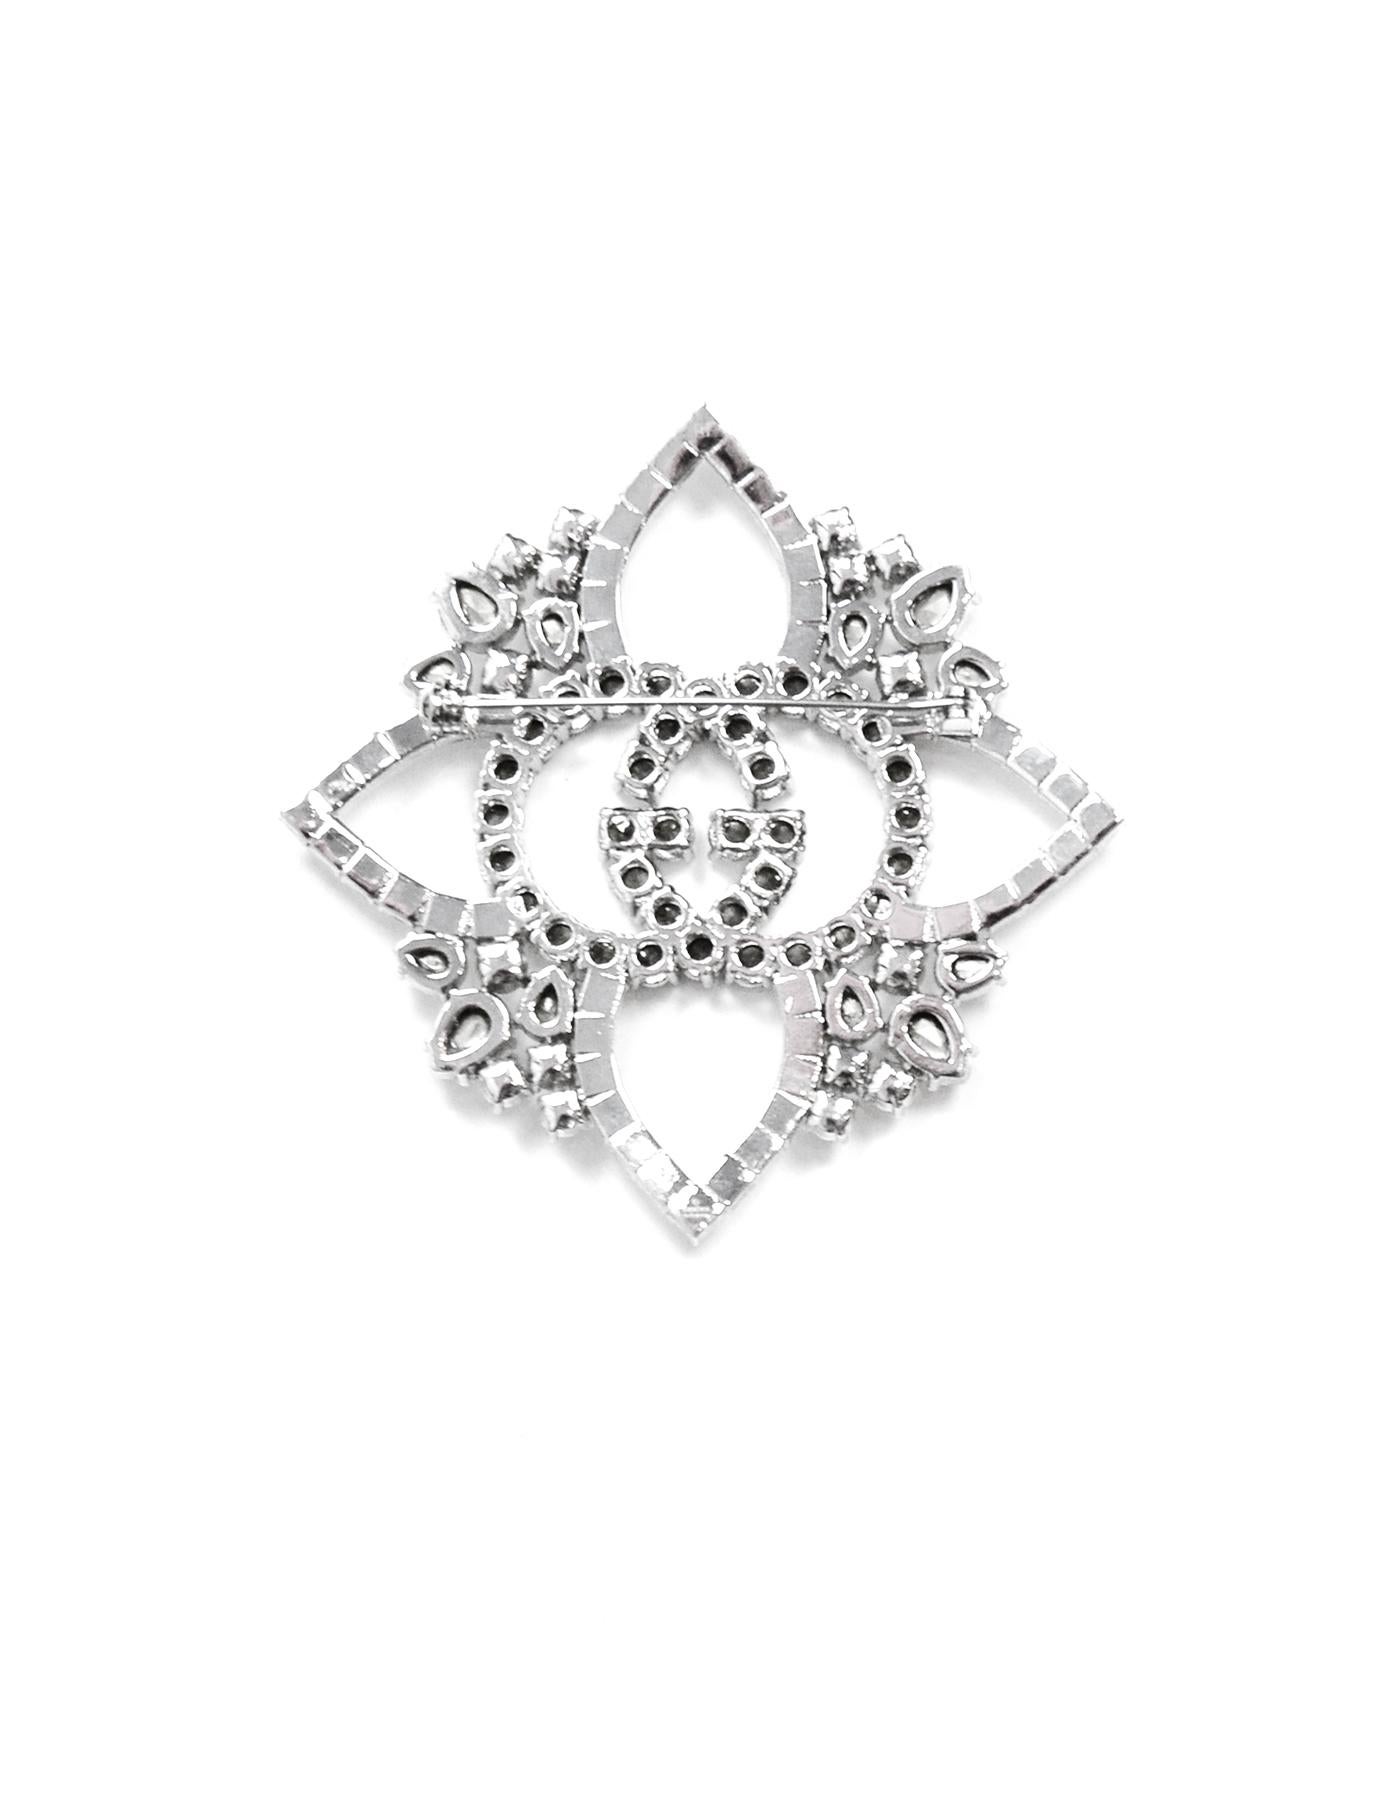 Gucci Crystal Embellished GG Brooch Pin
Made In: Italy
Year of Production: 2019
Color: Silvertone
Materials: Metal and crystal
Hallmarks: Gucci made in italy
Closure/Opening: Pin fastener
Overall Condition: Excellent pre-owned condition
Estimated